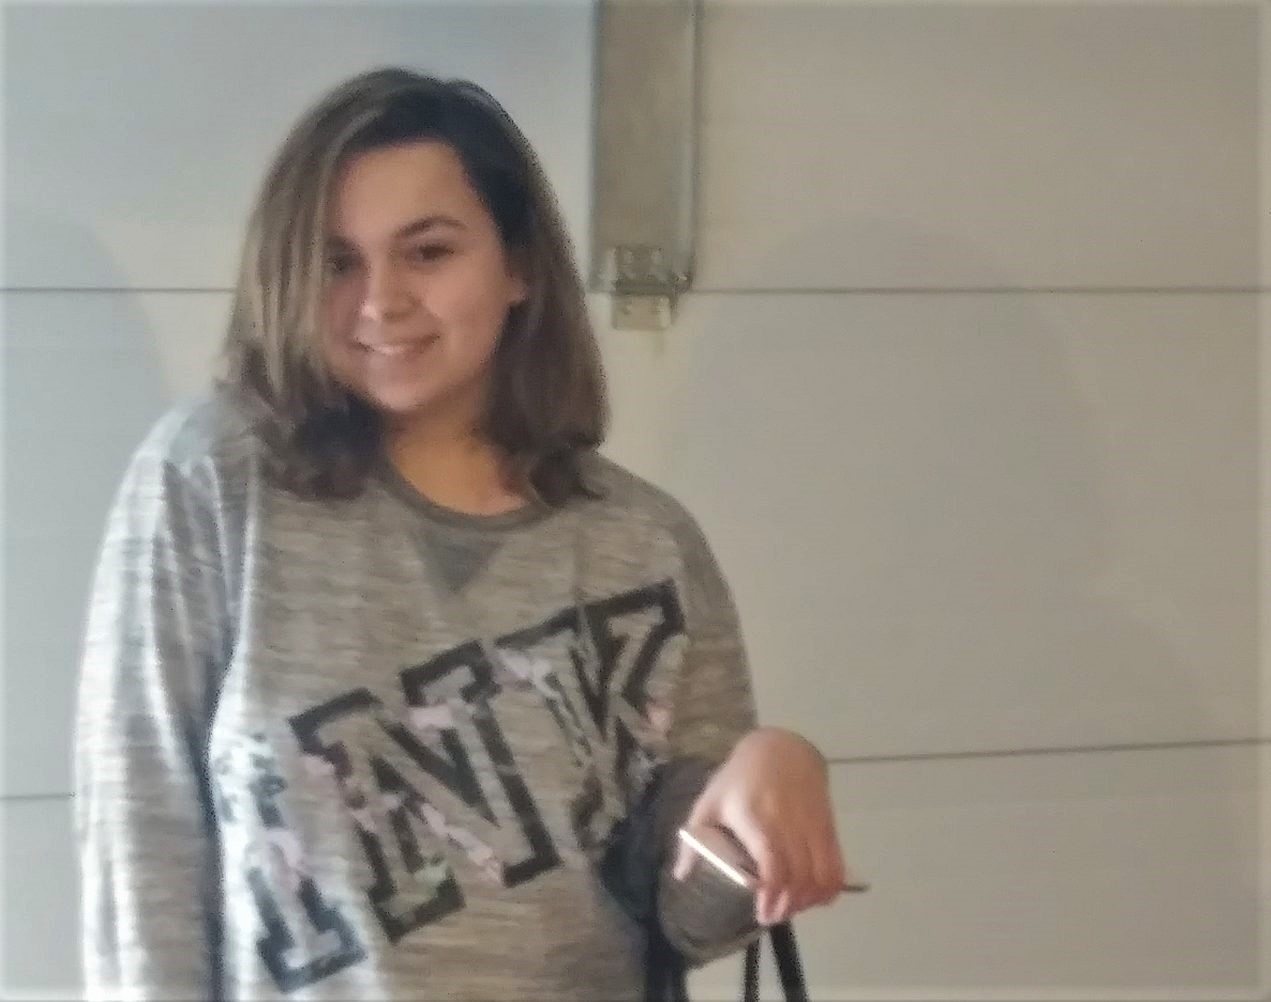 Police Searching for Missing 14-Year-Old Girl in West Newbury/Newbury